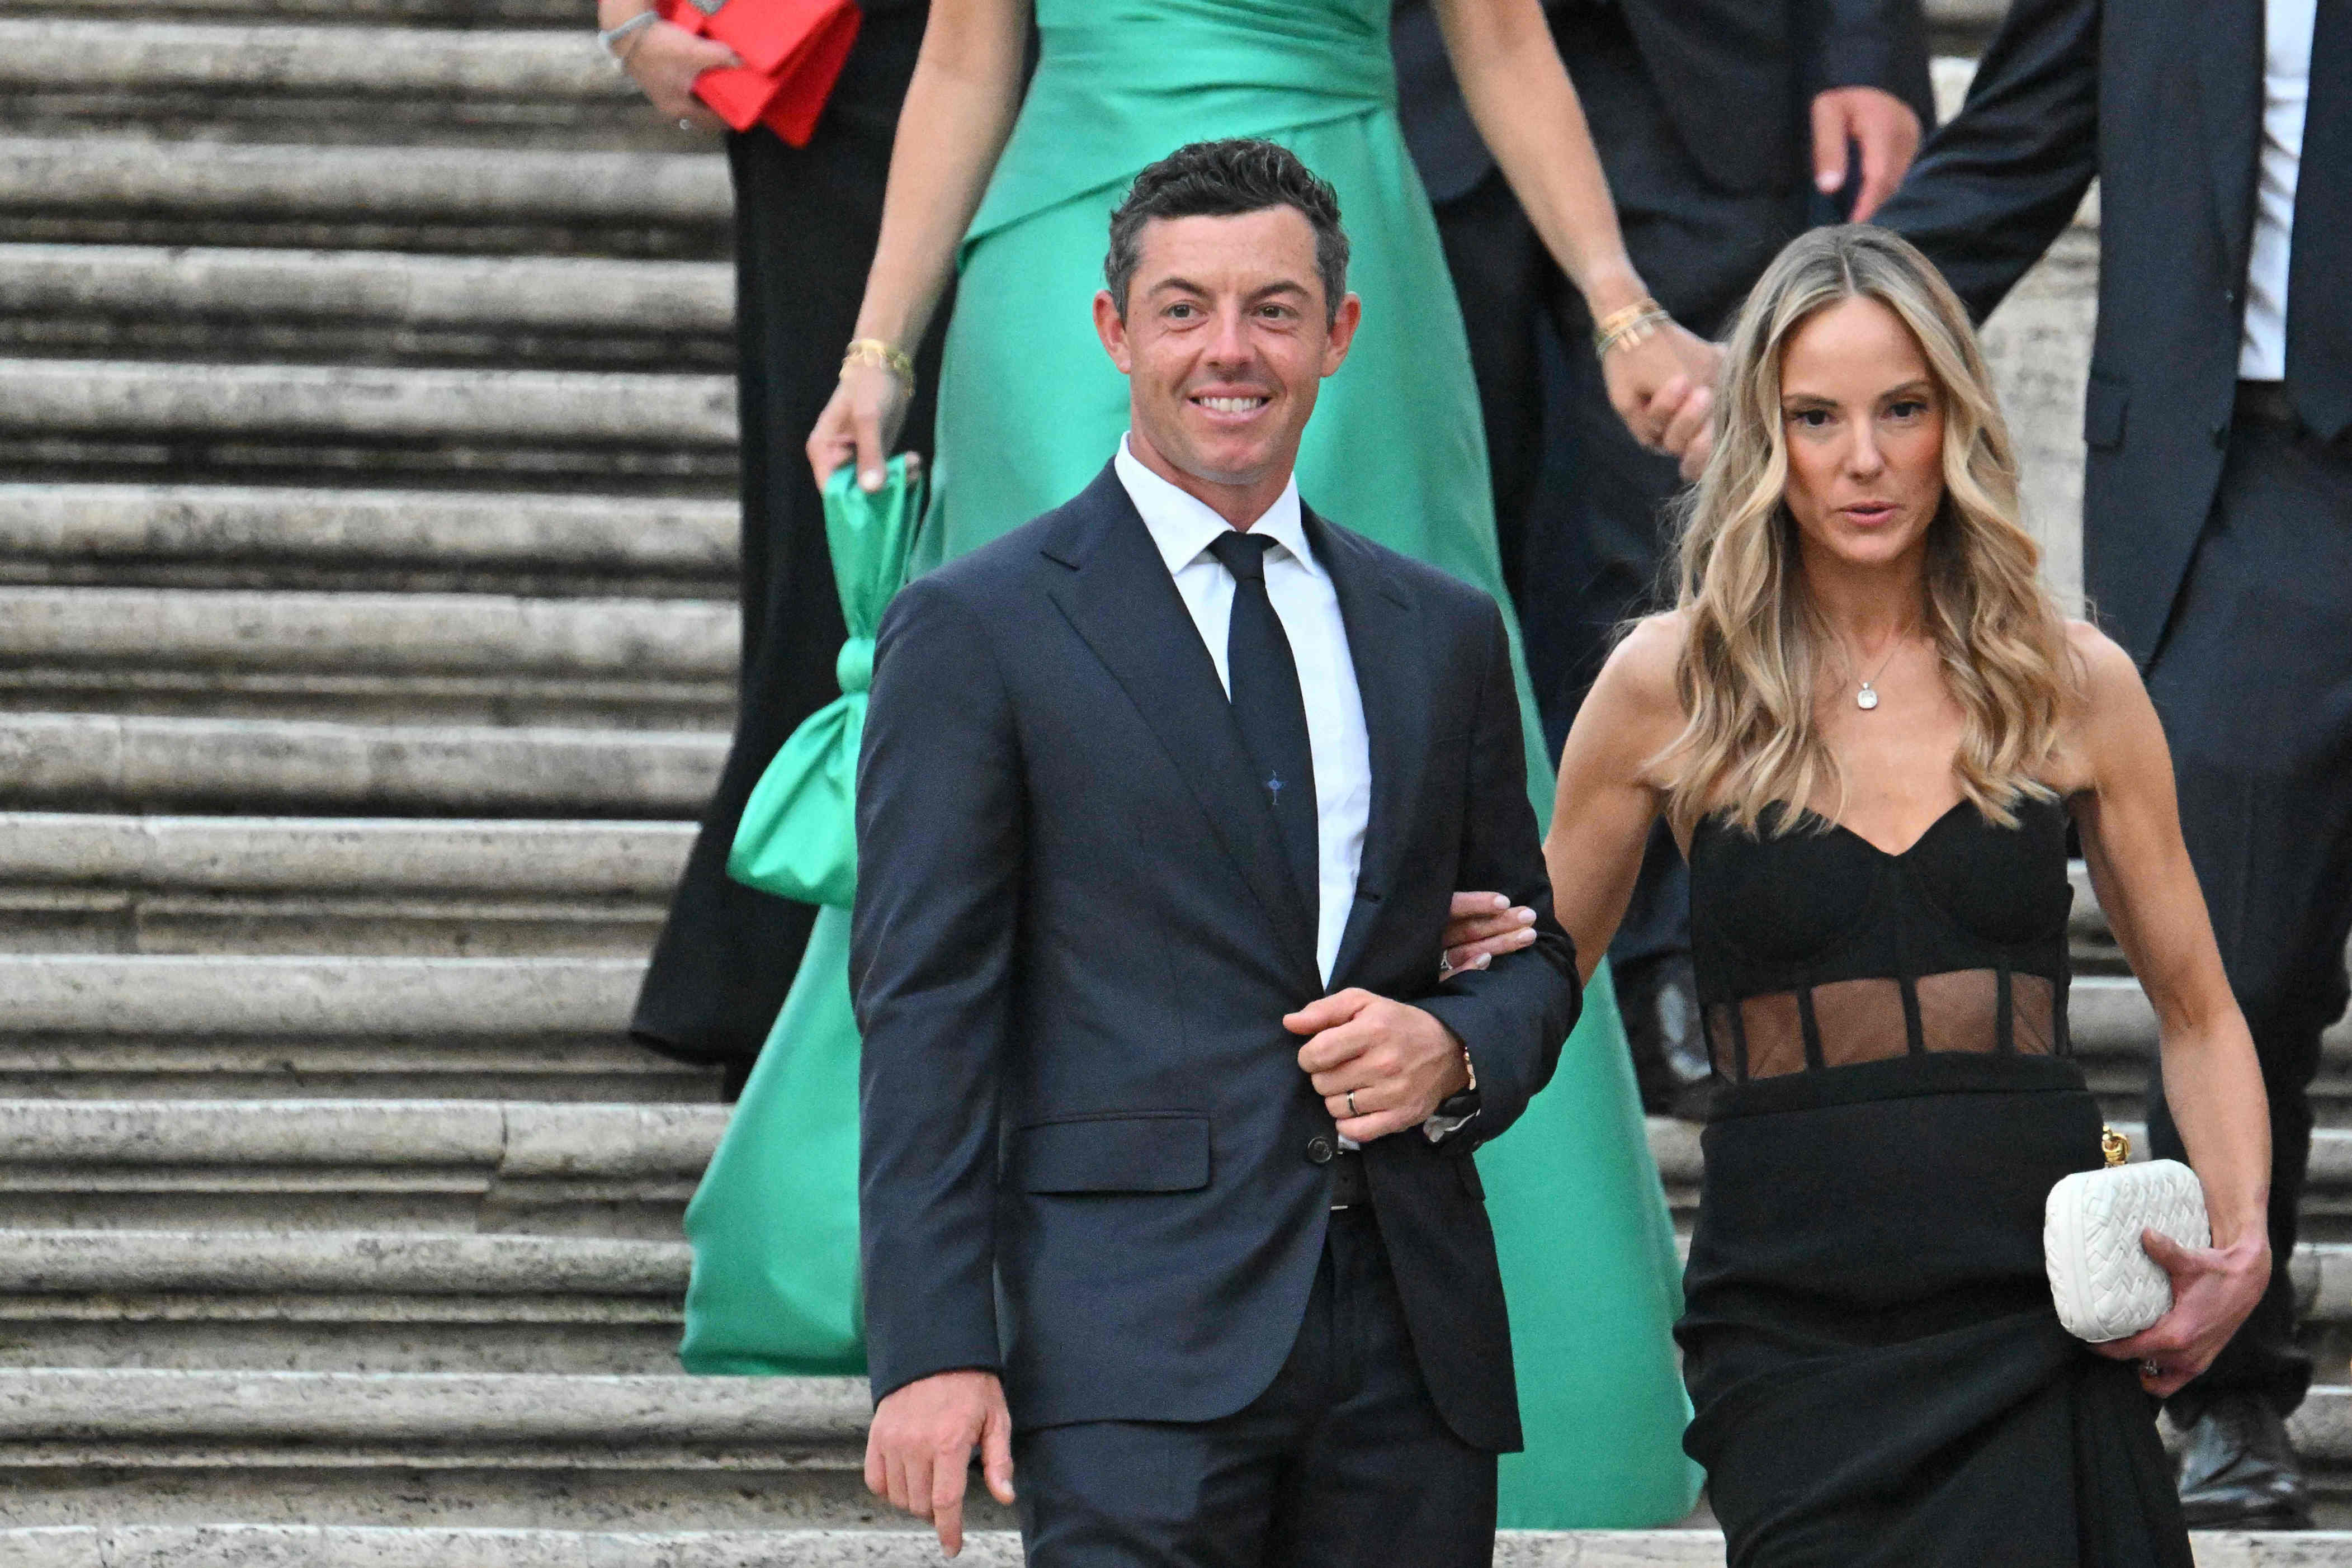 10 photos of golf's best-dressed couples at the 2023 Ryder Cup gala